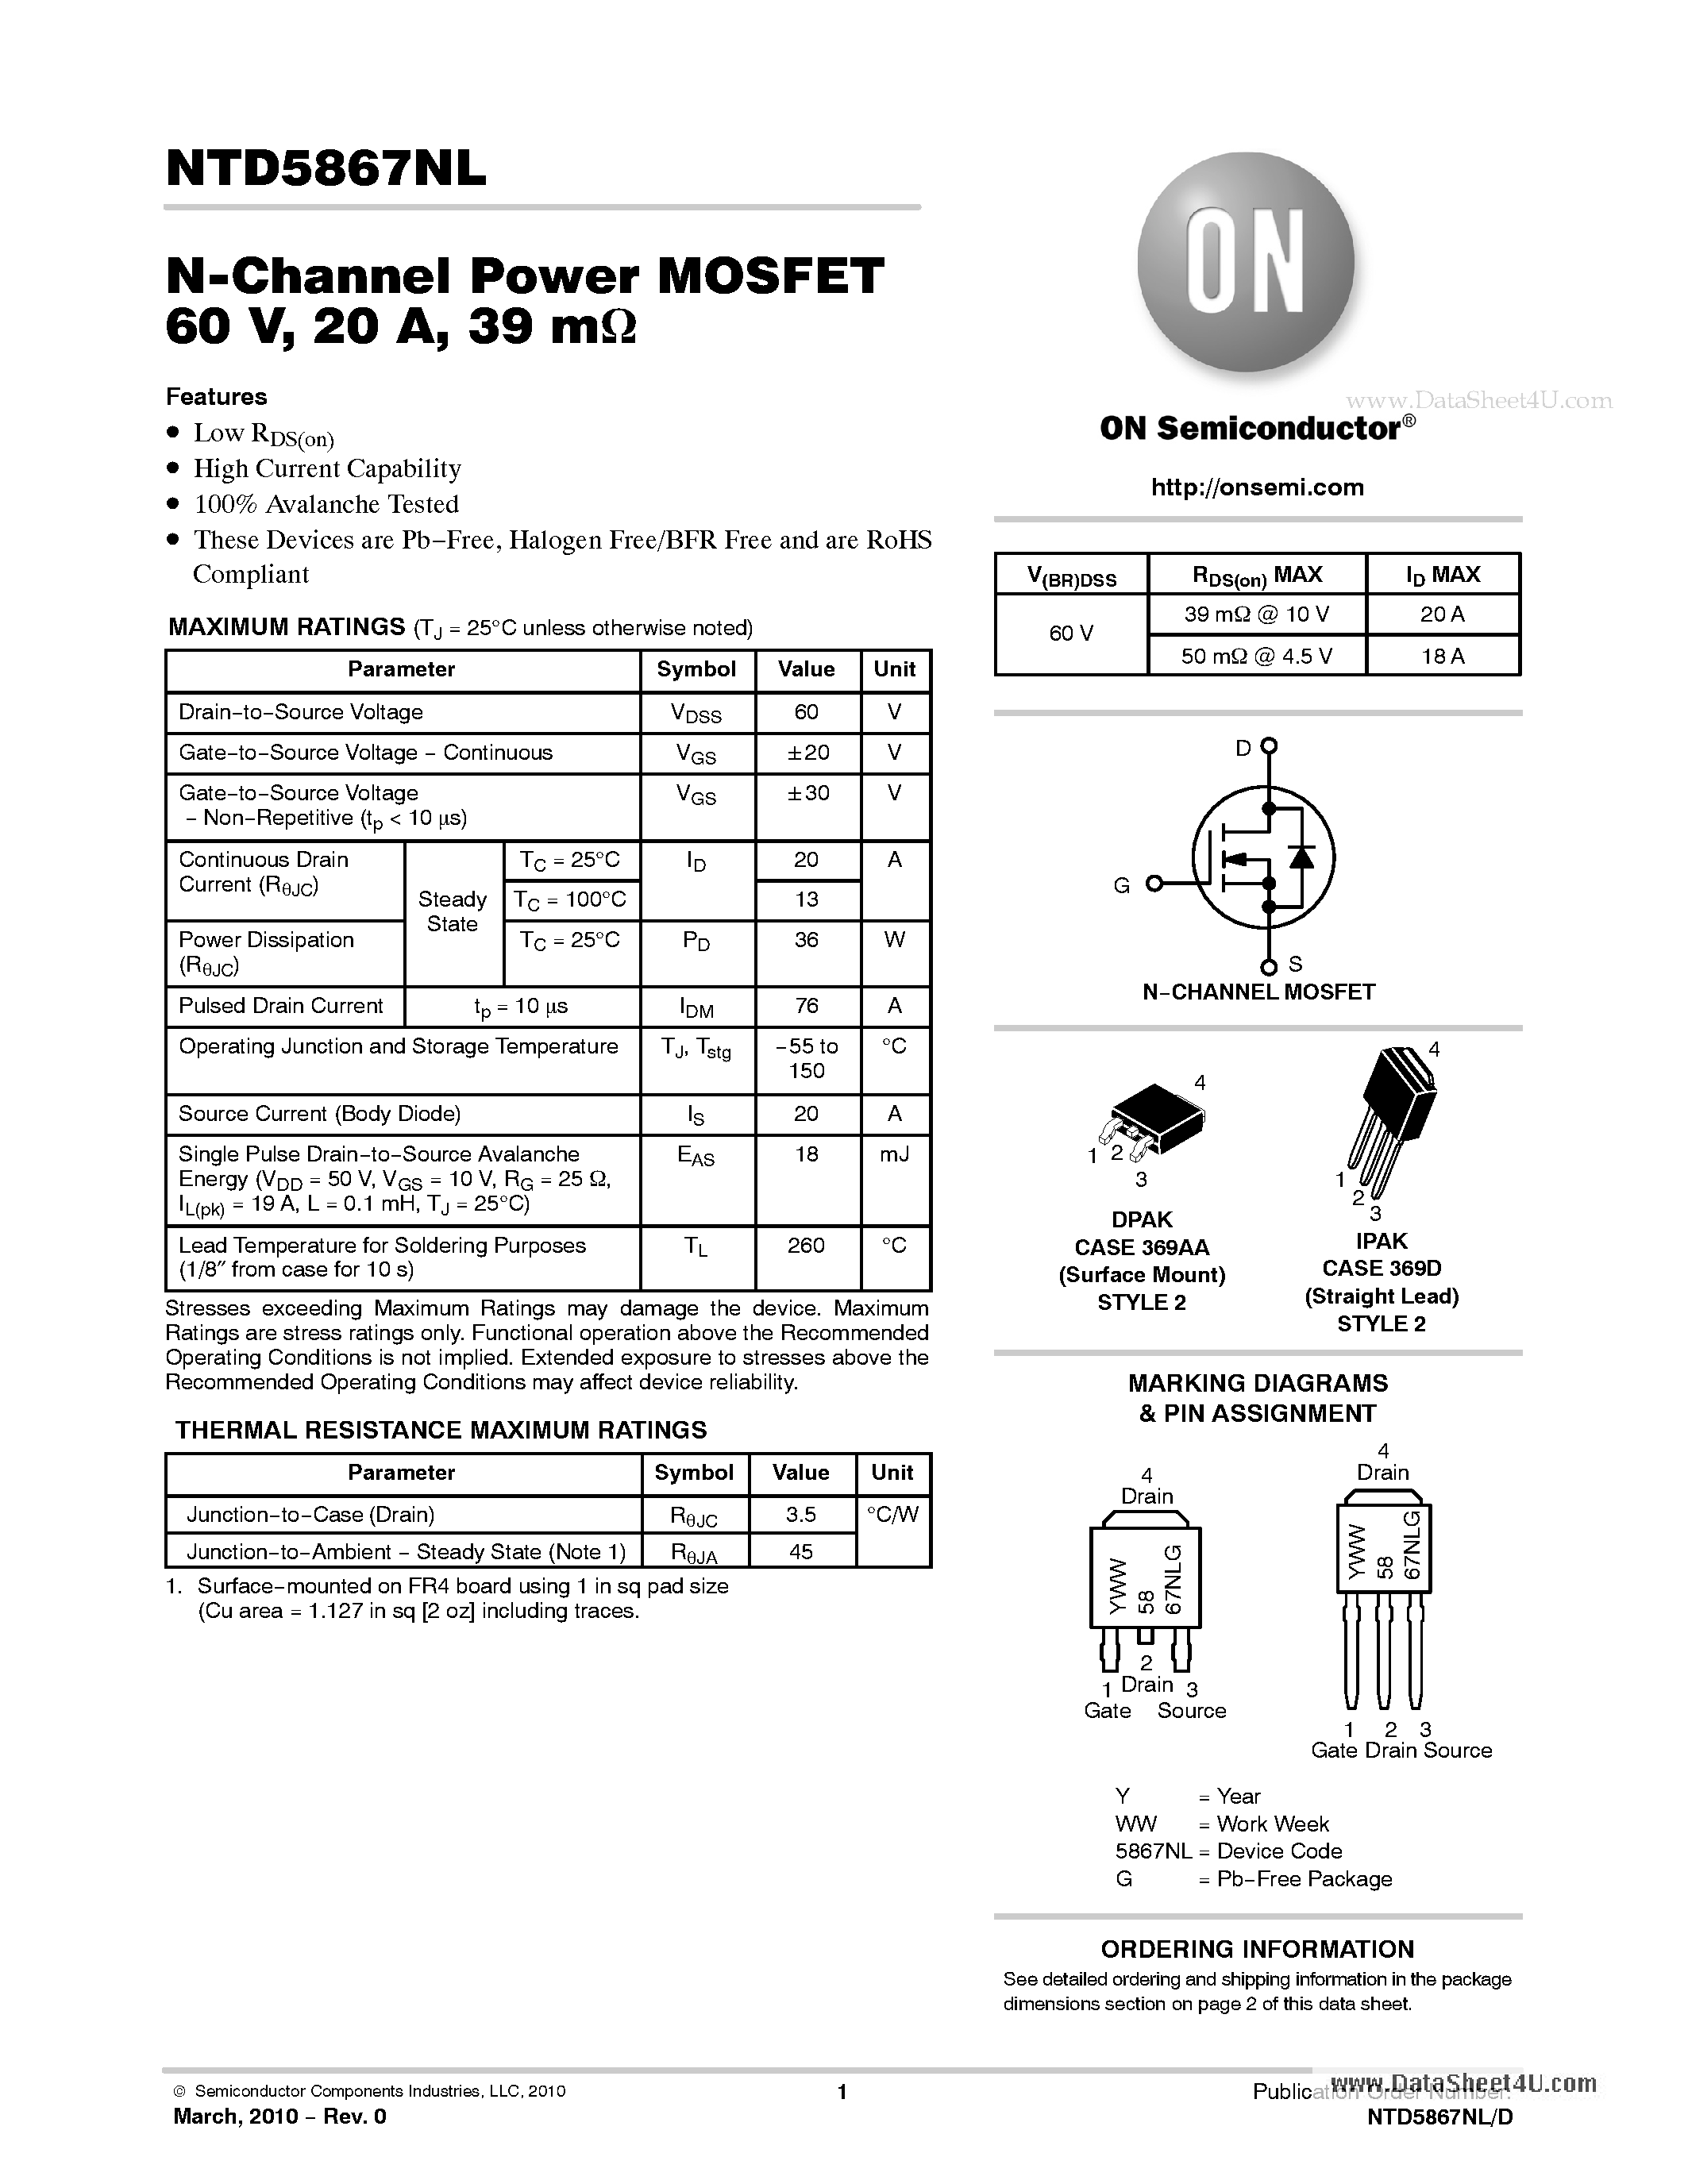 Datasheet NTD5867NL - N-Channel Power MOSFET 60 V / 20 A / 39 m ome page 1